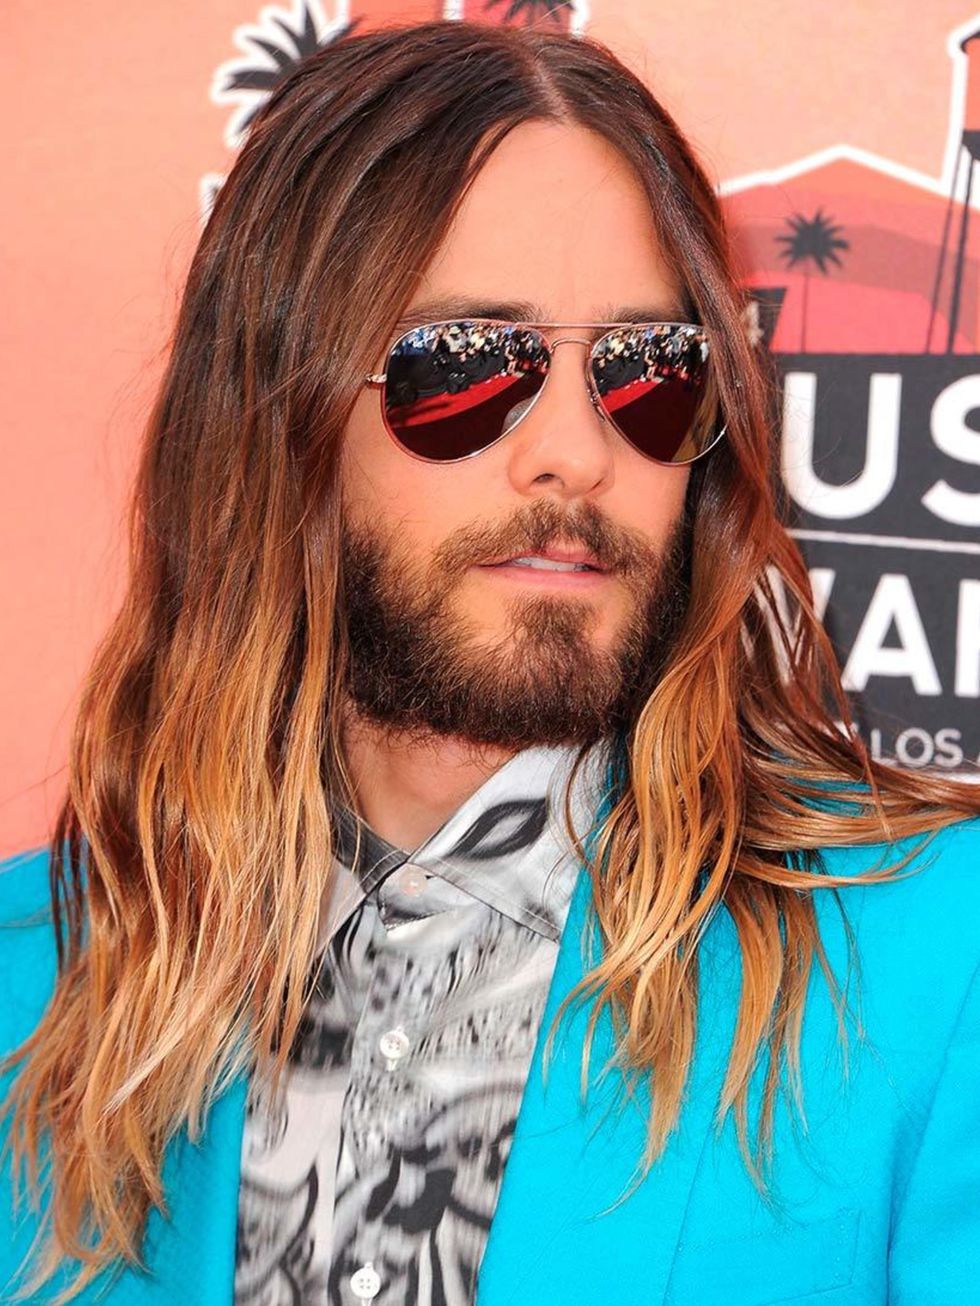 Jared Leto

Who doesn't want hair like Jared Leto's? The cool centre part, the ombre ends and that piecey texture. We need his hairstylist on speed dial, STAT.